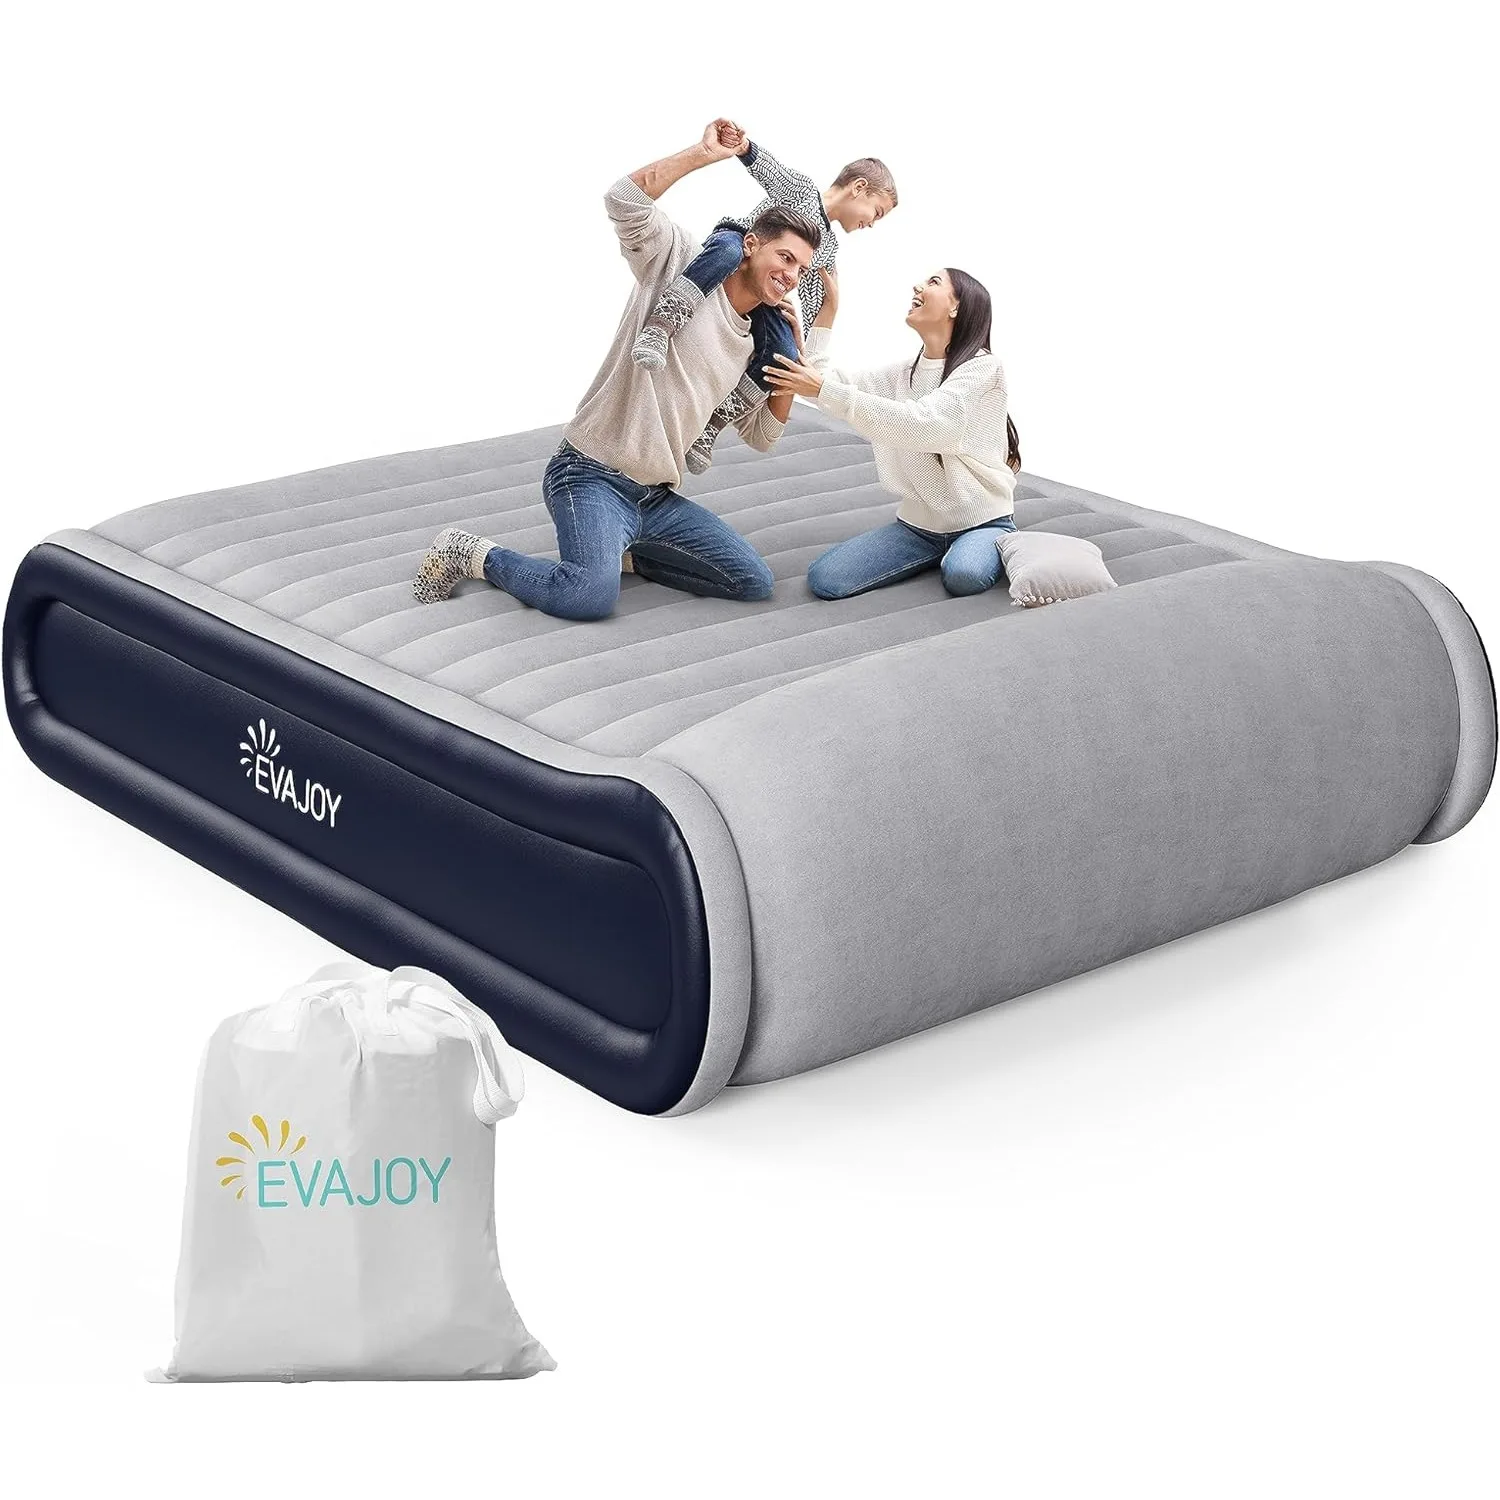 

Evajoy Air Mattress with Built-in Pump, Inflatable Air Mattress with Integrated Pillow, Fast Inflation/Deflation, Airbed